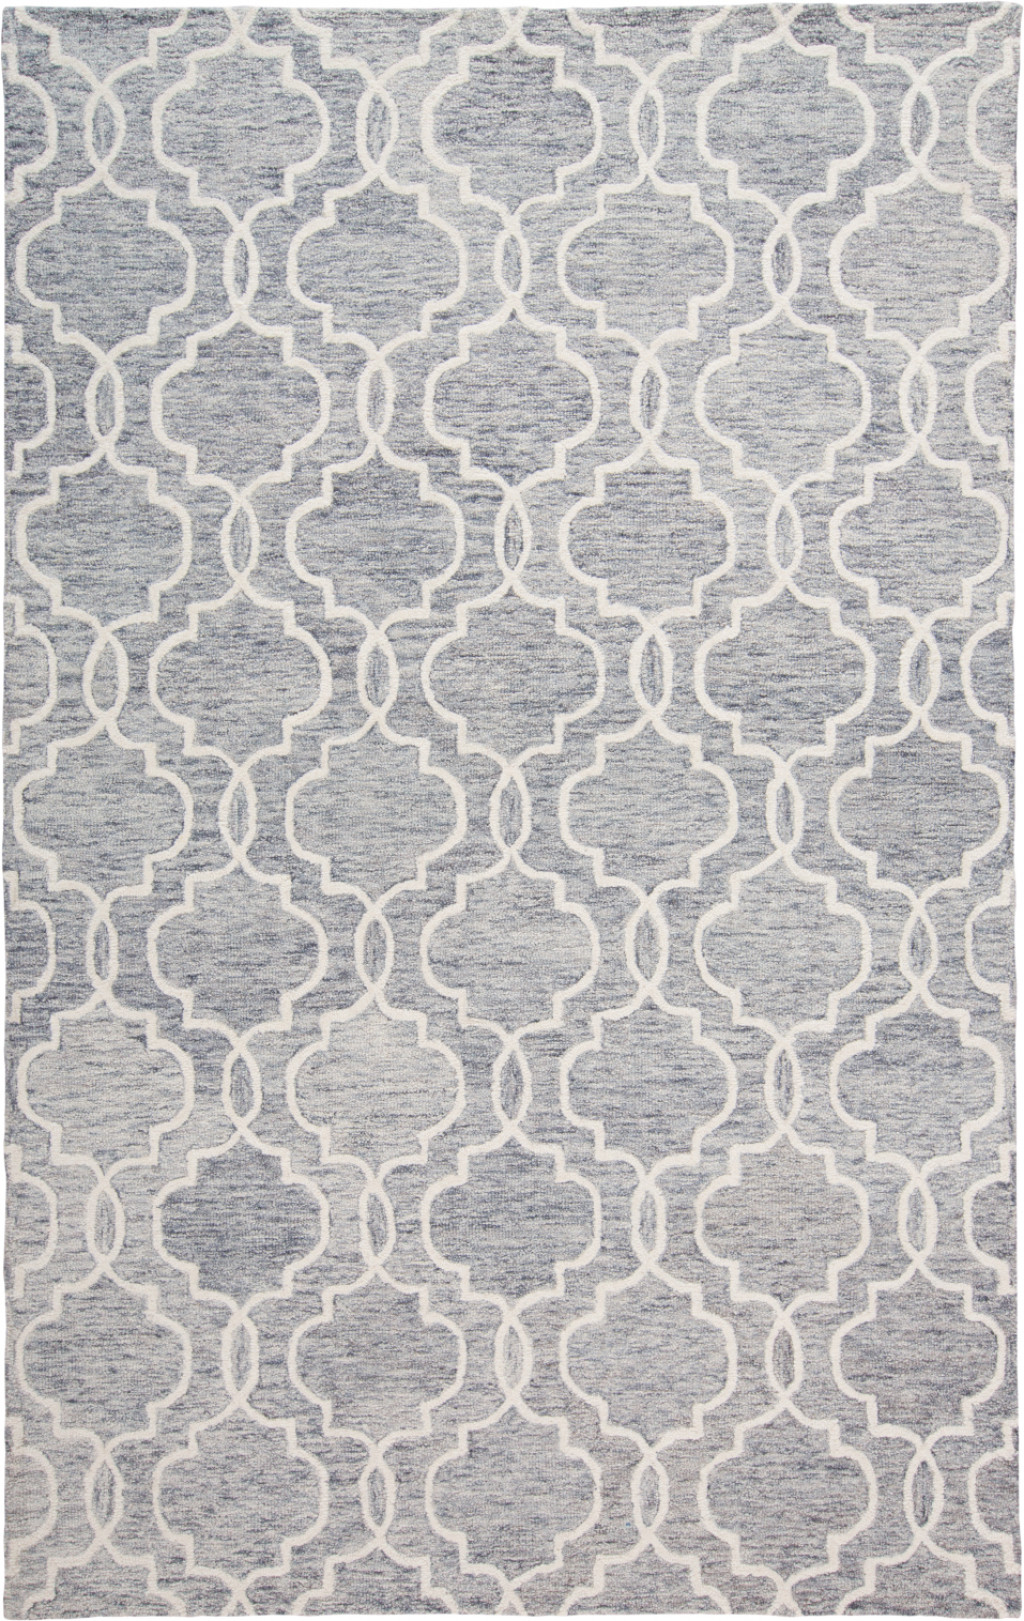 8' X 10' Blue Gray And Ivory Wool Geometric Tufted Handmade Stain Resistant Area Rug-512185-1